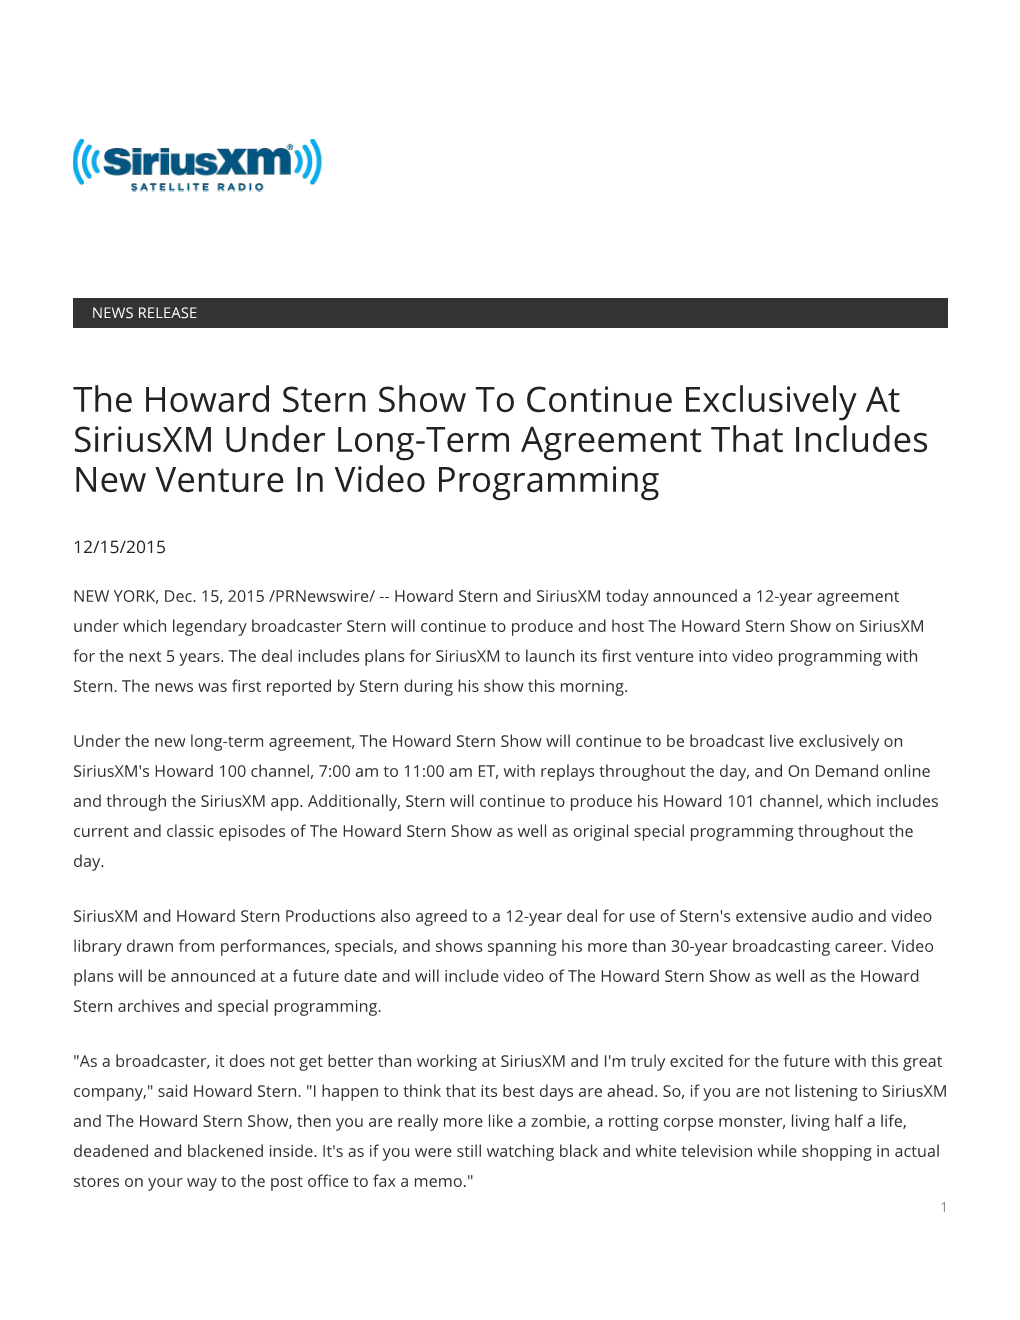 The Howard Stern Show to Continue Exclusively at Siriusxm Under Long-Term Agreement That Includes New Venture in Video Programming